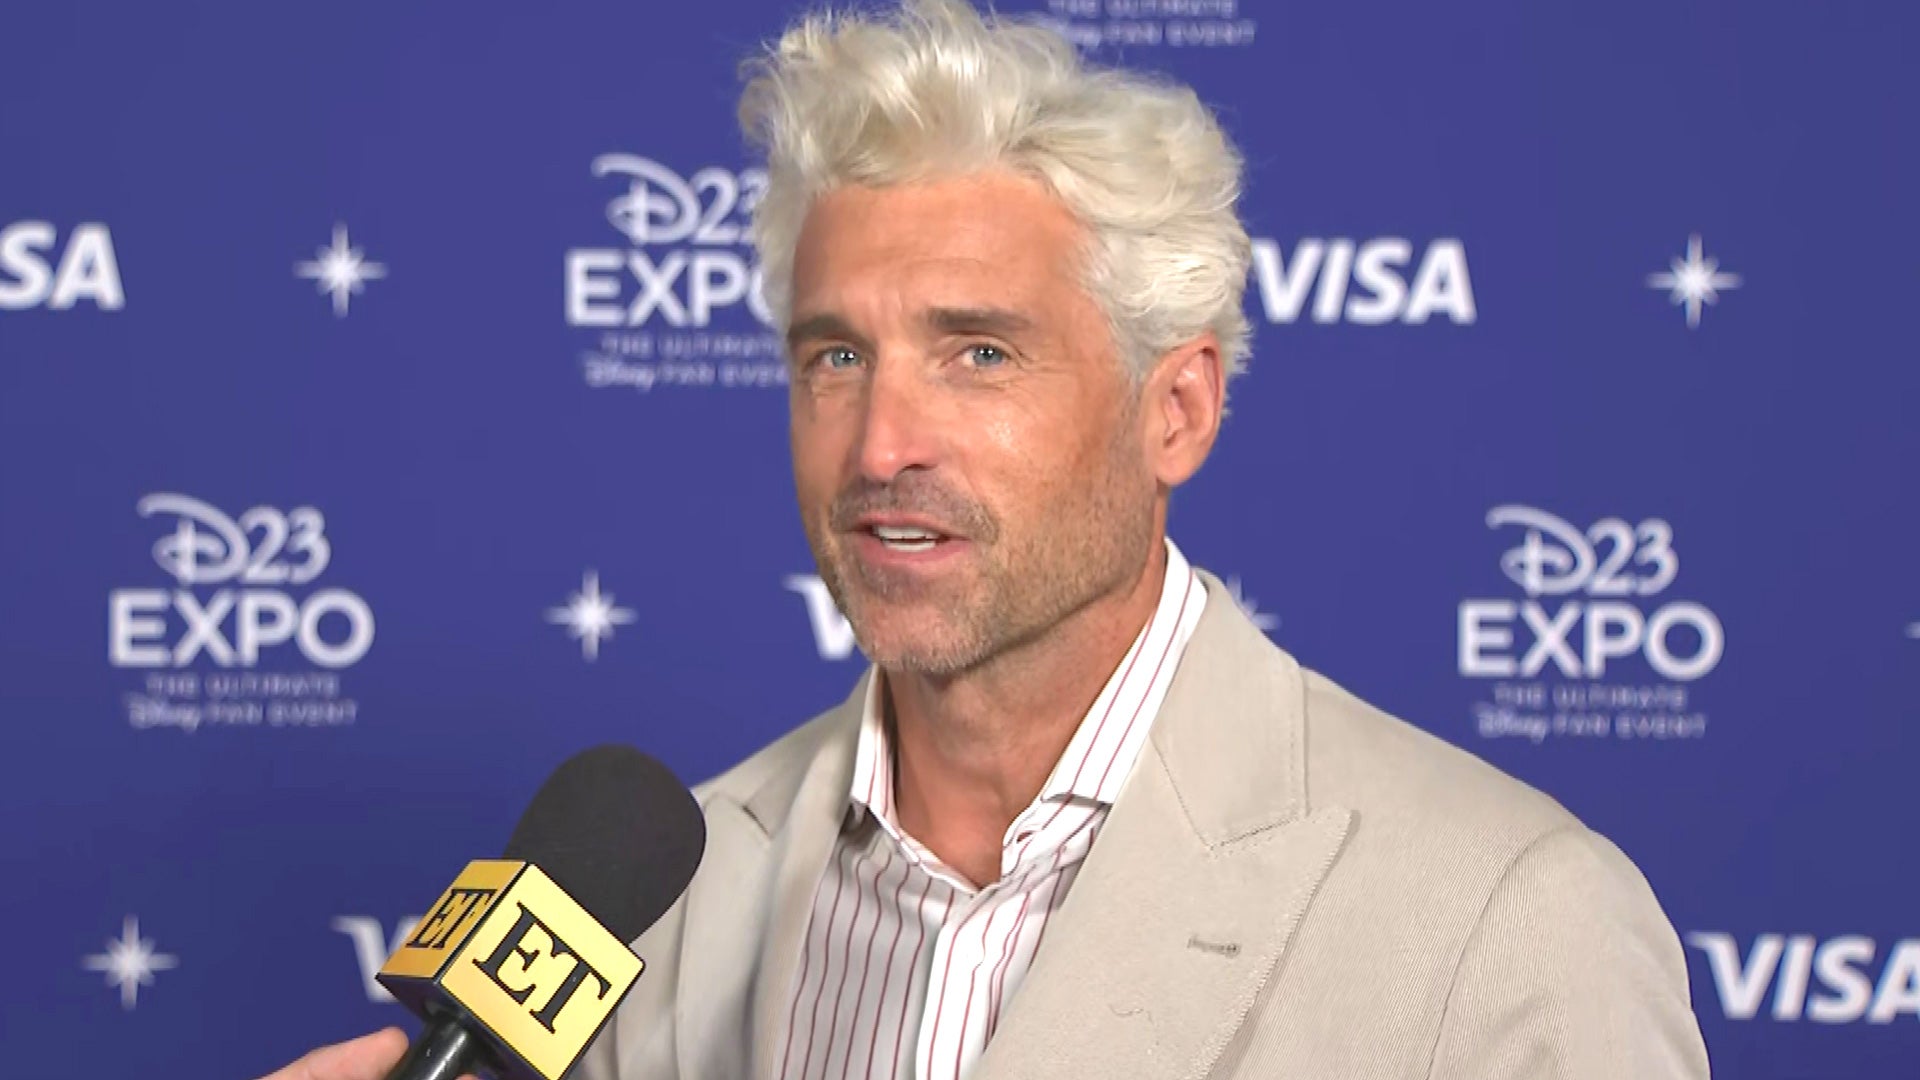 Patrick Dempsey Reveals the Reason for His Silver Hair Transformation  (Exclusive) | Entertainment Tonight